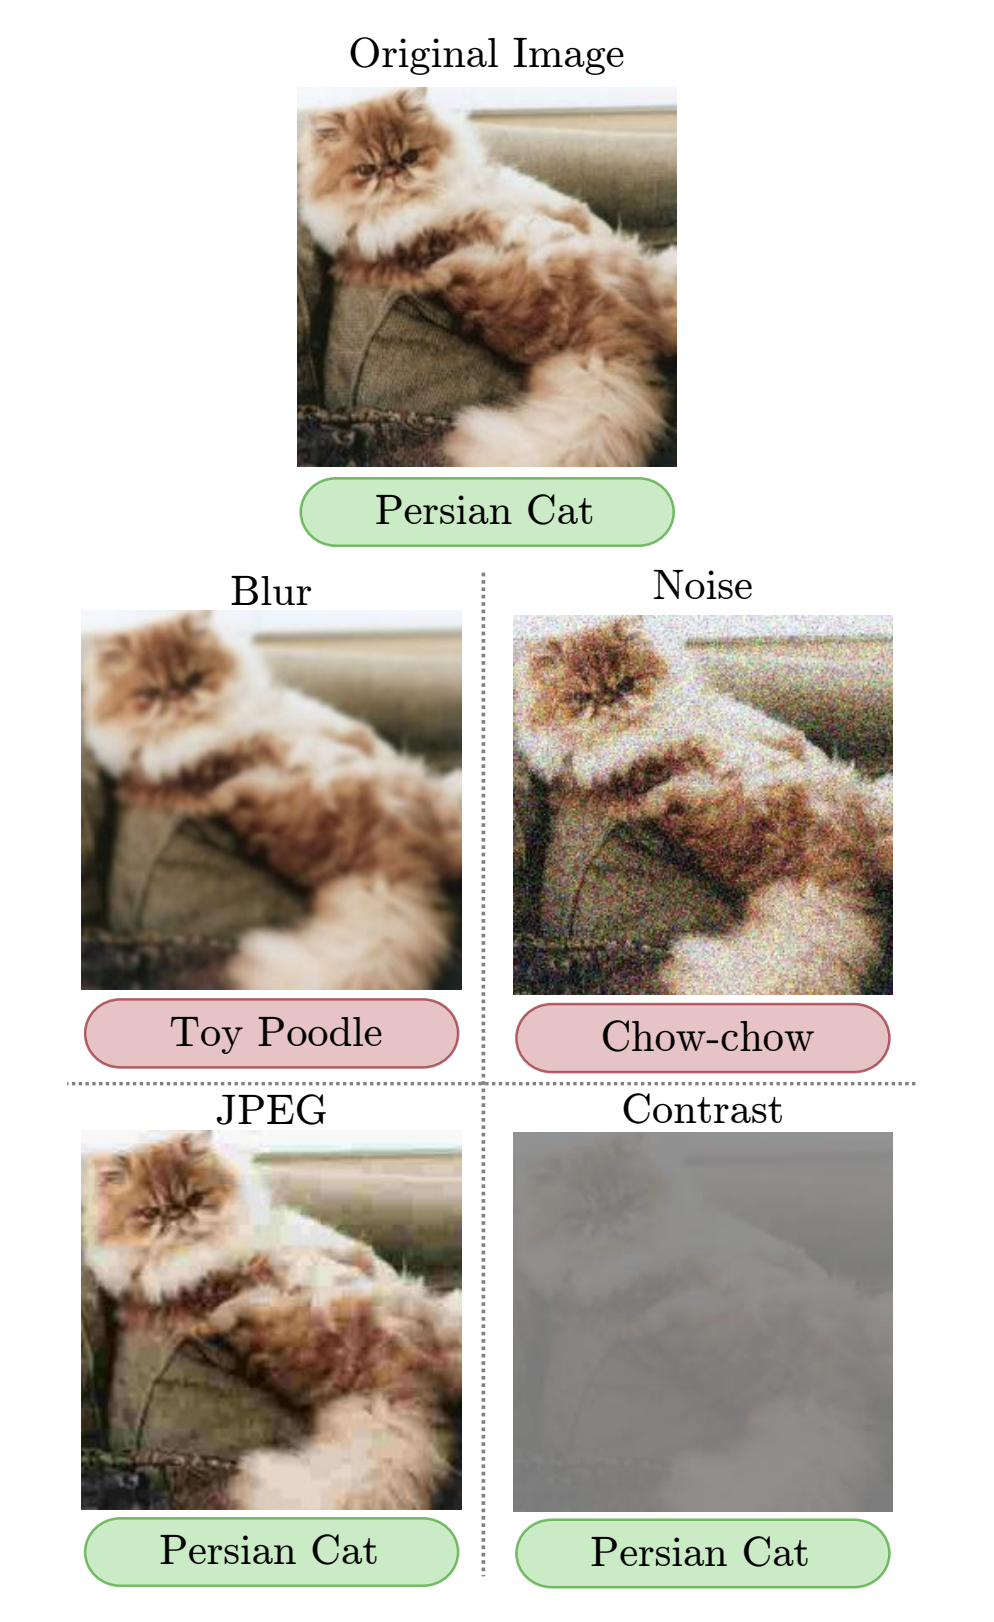 Visualization of a persian cat with blur, noise, JPEG artifacting, and decreased contrast applied.